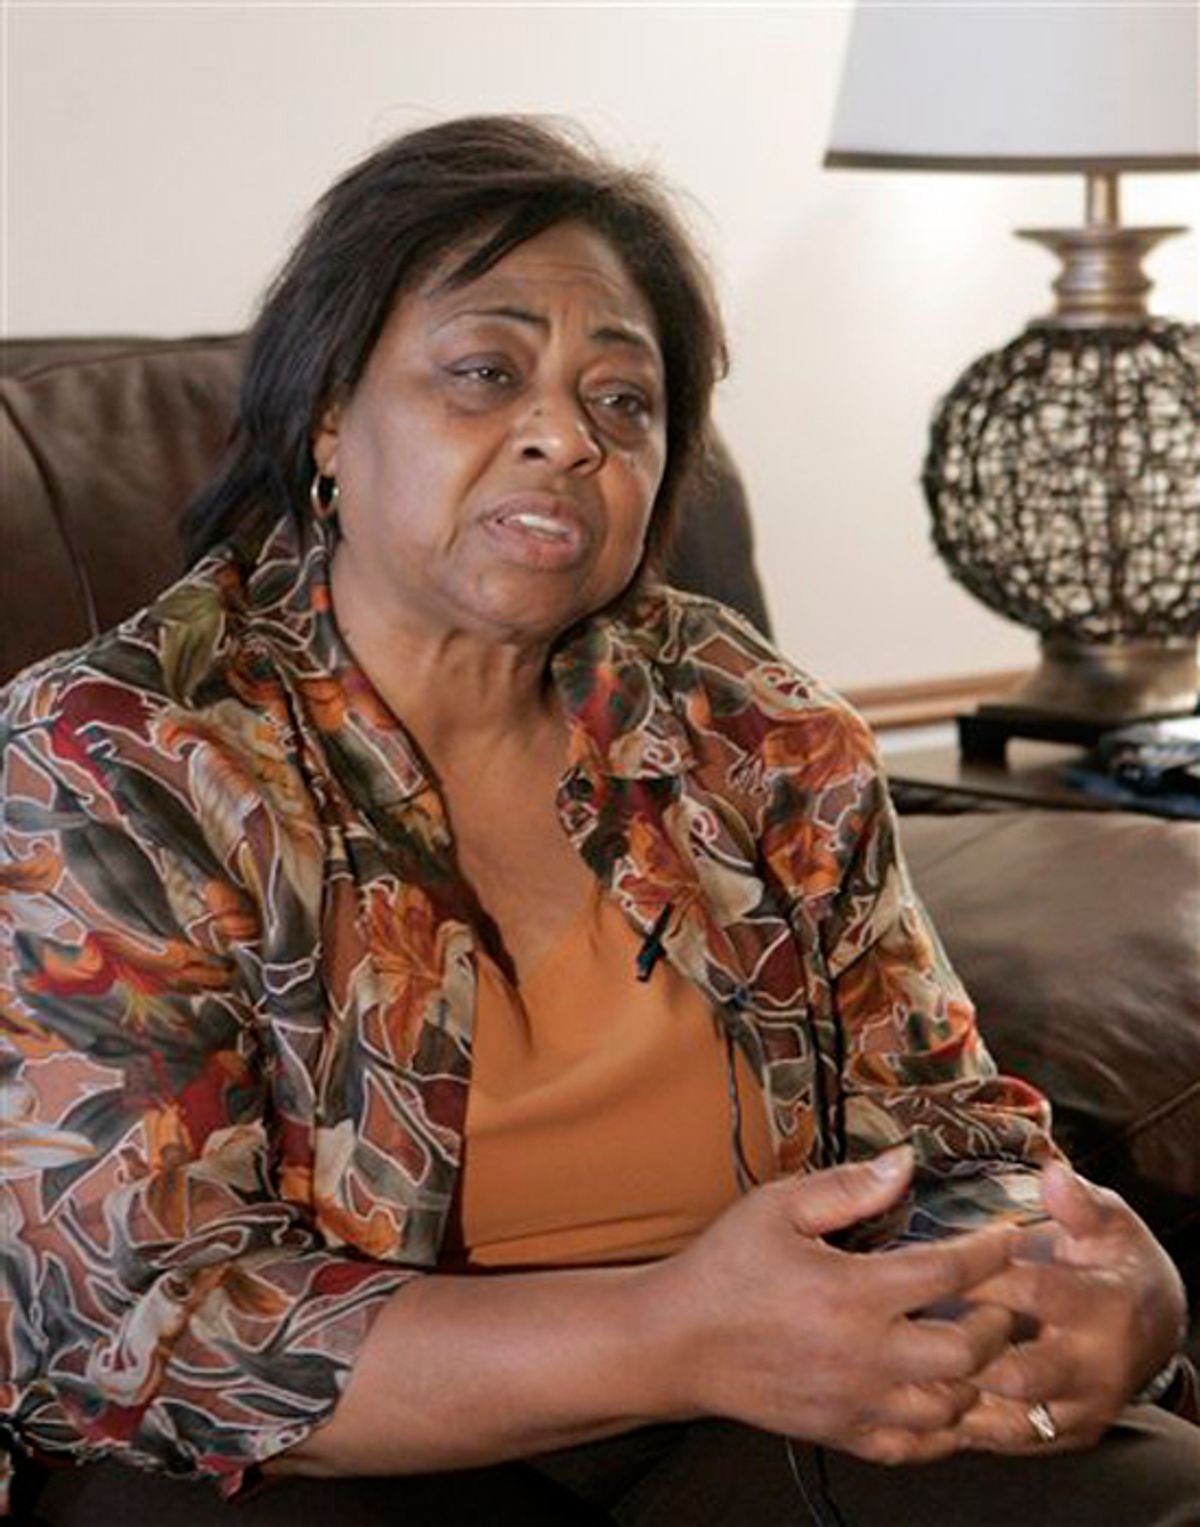 Shirley Sherrod answers questions during an interview at her home on Friday, July 23, 2010 in Albany, Ga. Sherrod was fired from her job at the Agriculture Department amid accusations of racism. (AP Photo/Steve Cannon) (Steve Cannon)